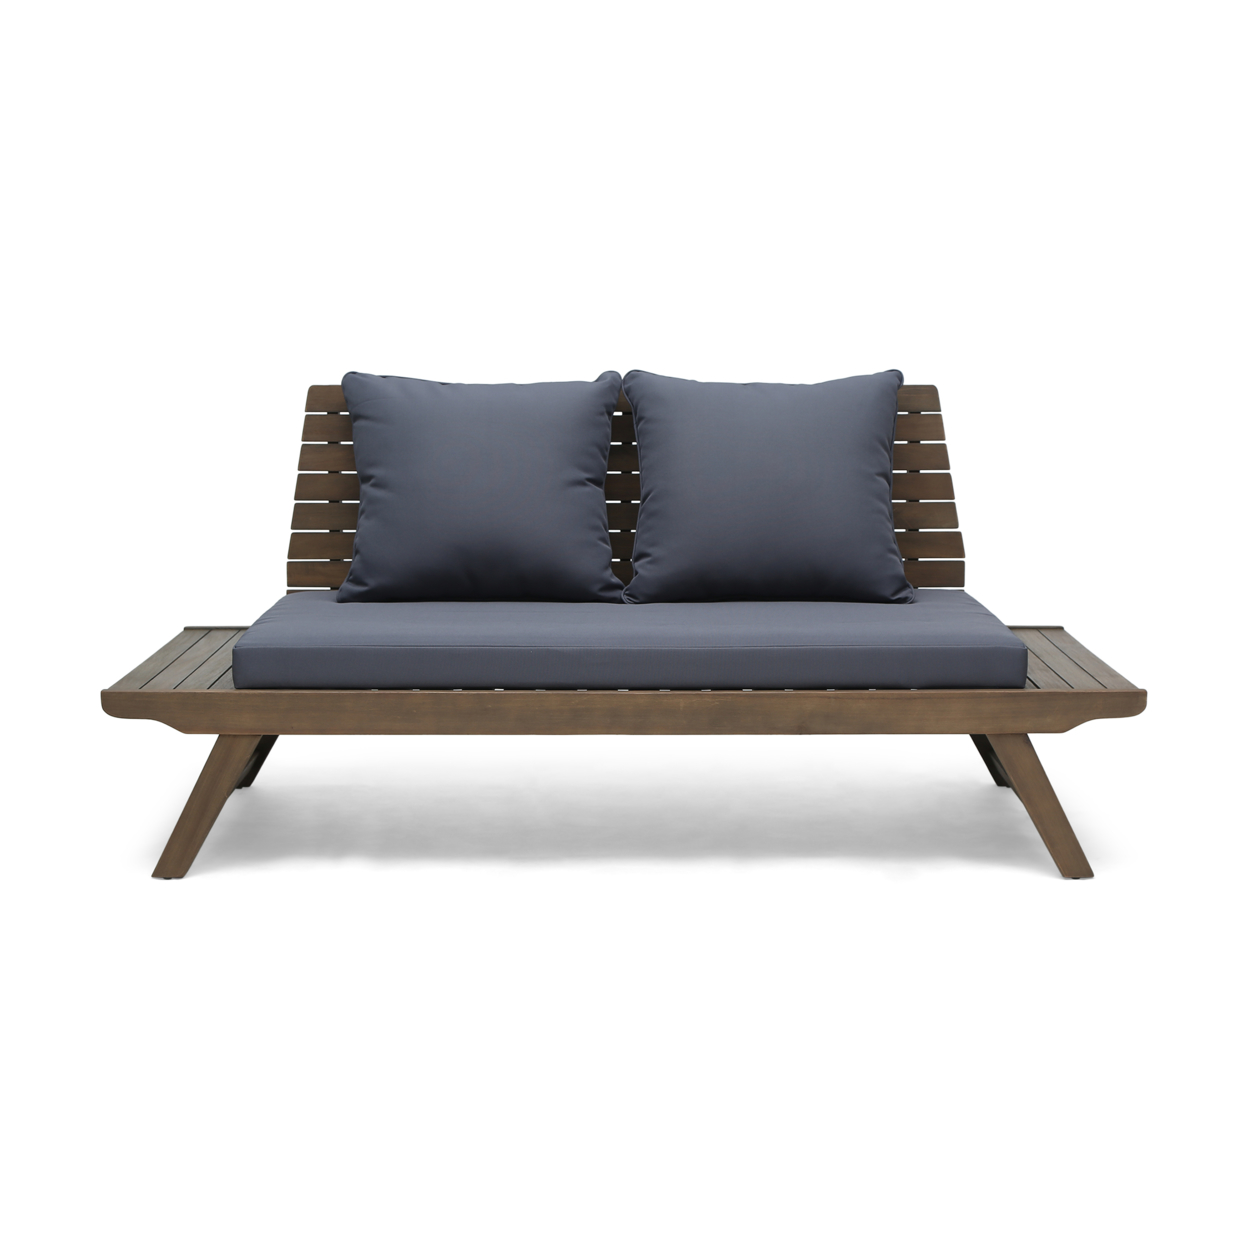 Kailee Outdoor Wooden Loveseat With Cushions - Dark Gray + Gray Finish